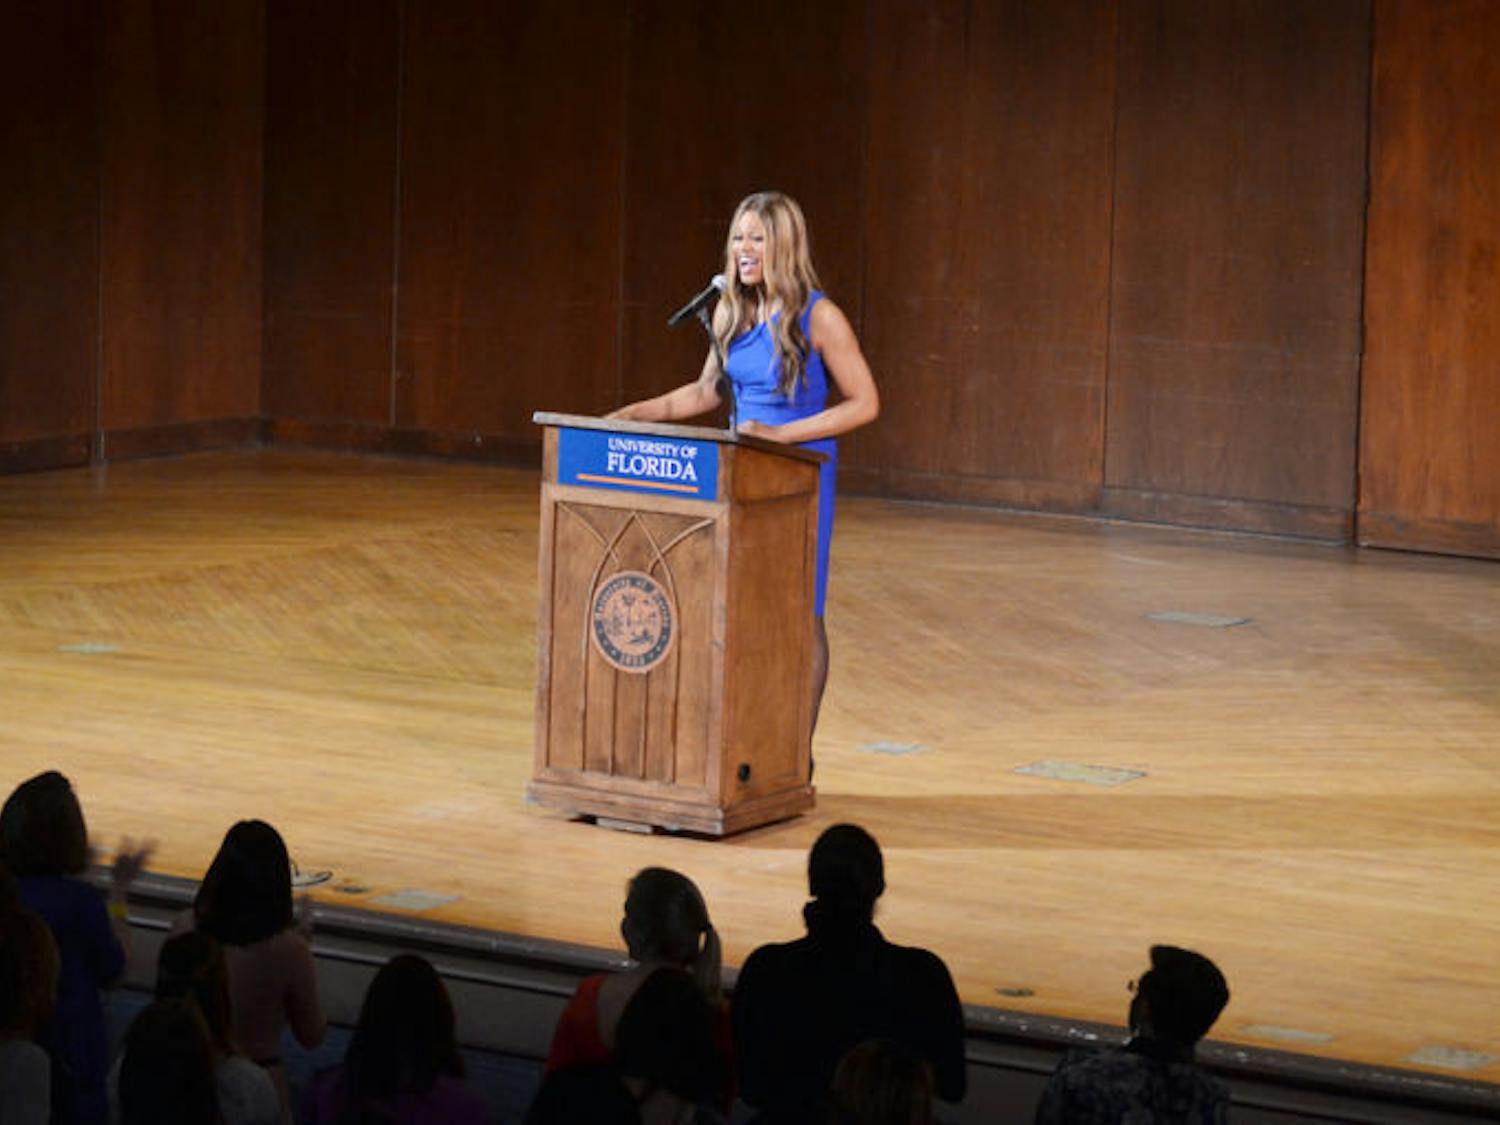 Laverne Cox, famous for her role in “Orange Is The New Black,” talks about her journey as a transgender woman to students at the University Auditorium on Monday evening. About 690 people attended the speech.